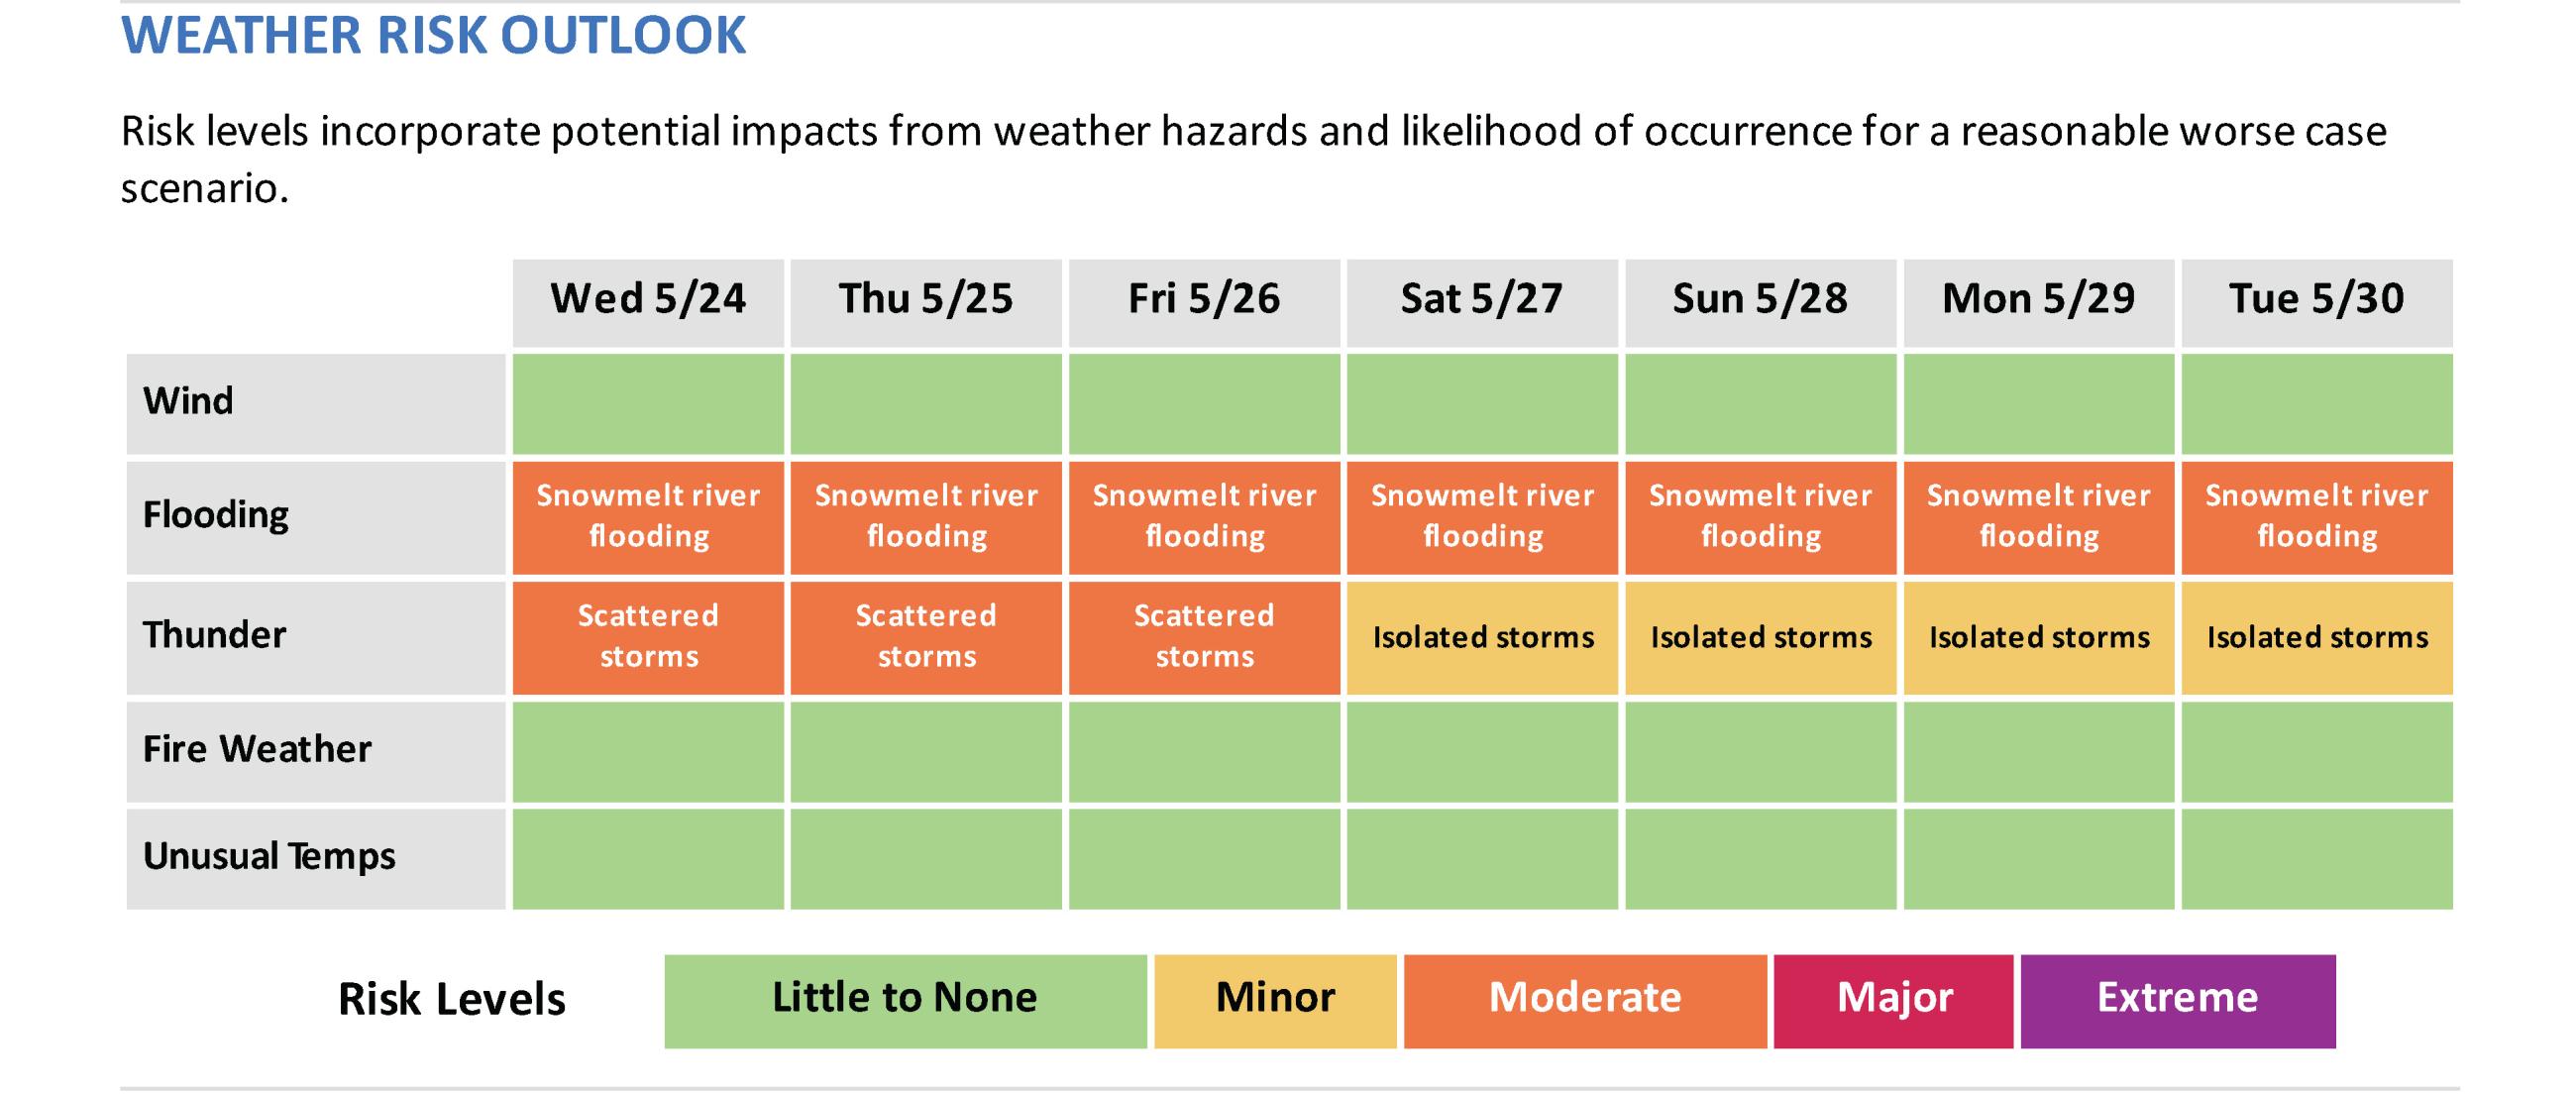 Image showing the National Weather Service Weather Risk Outlook table beginning May 24 thru May 30 that displays risk levels that incorporate potential impacts from weather hazards and likelihood of occurrence for a reasonable worst case scenario.